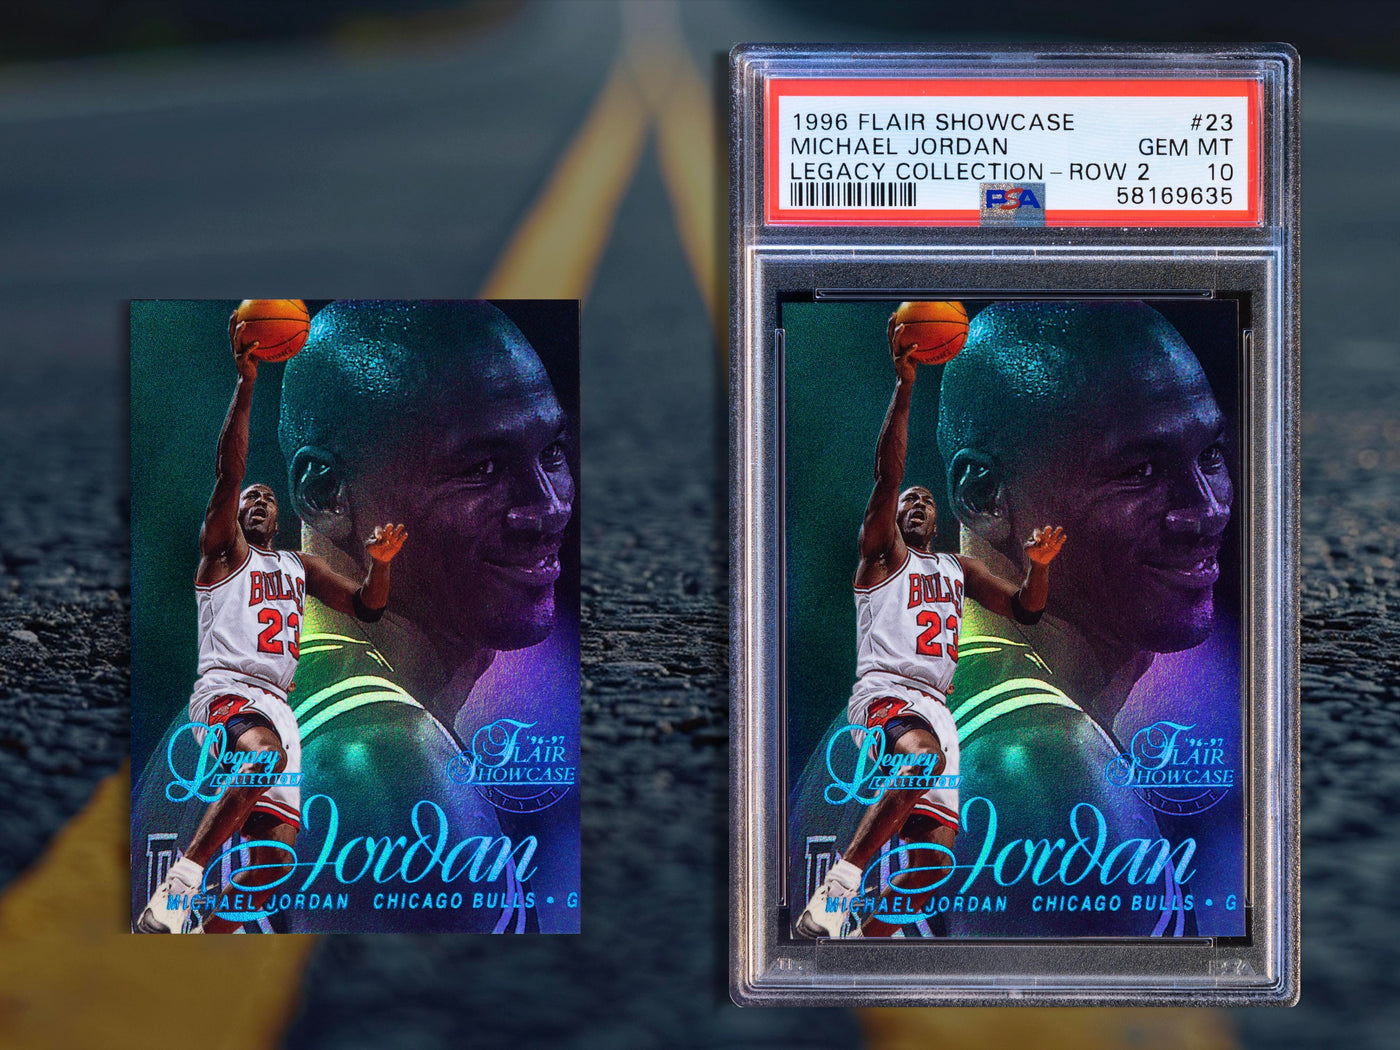 Image of a 1996 Flair Showcase Legacy Collection Row 2 Michael Jordan basketball card displayed in two conditions: raw and ungraded on the left, and encased in a PSA grading slab on the right, illustrating the transformation from raw to graded condition